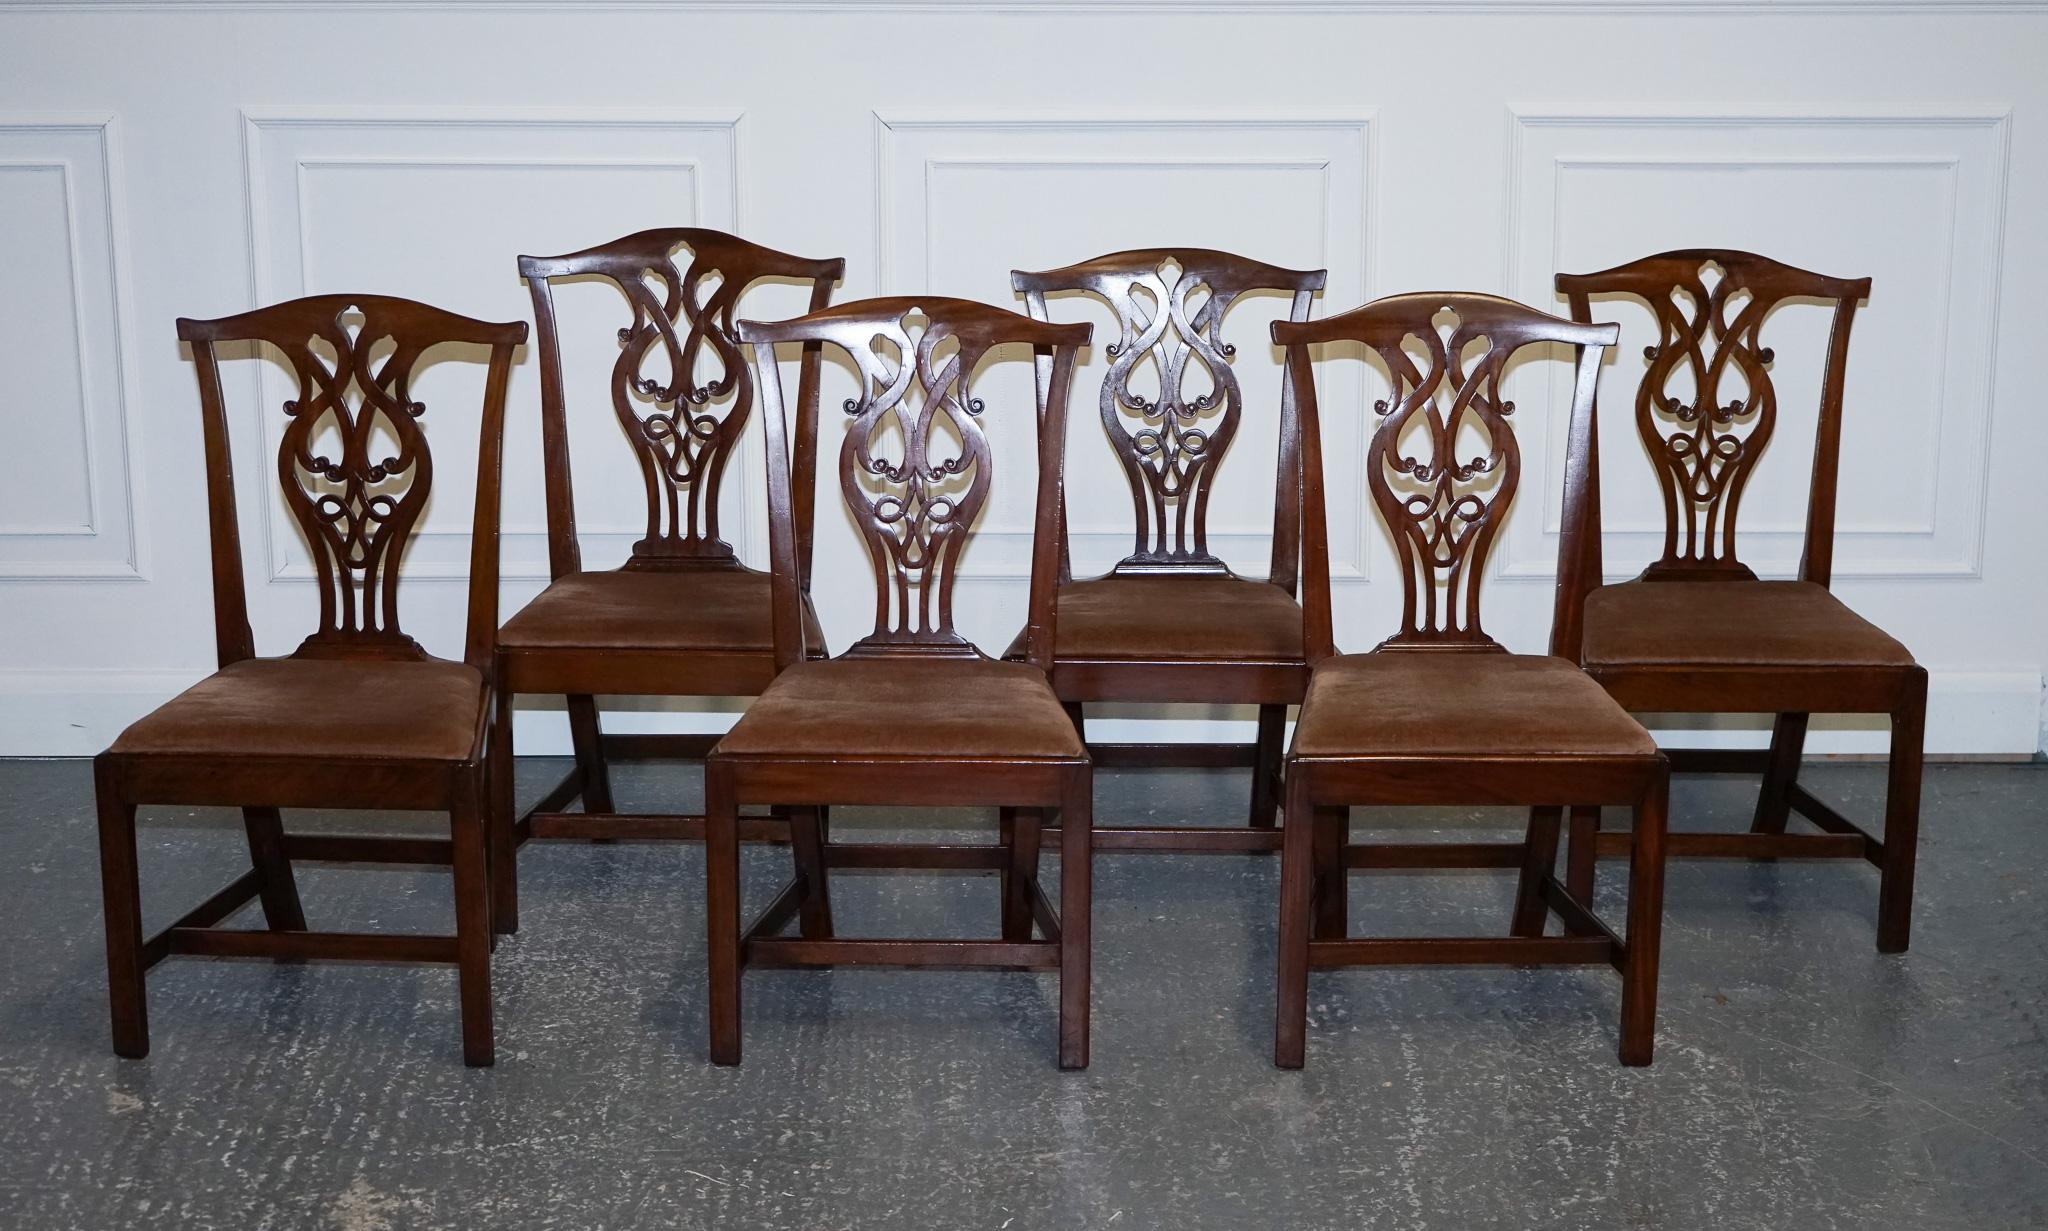 
We are delighted to offer for sale this Stunning Chippendale Style Set of 6 Dining Chairs.

A Chippendale style set of six dining chairs with H frames would typically feature Classic Chippendale design elements, such as graceful curves, straight